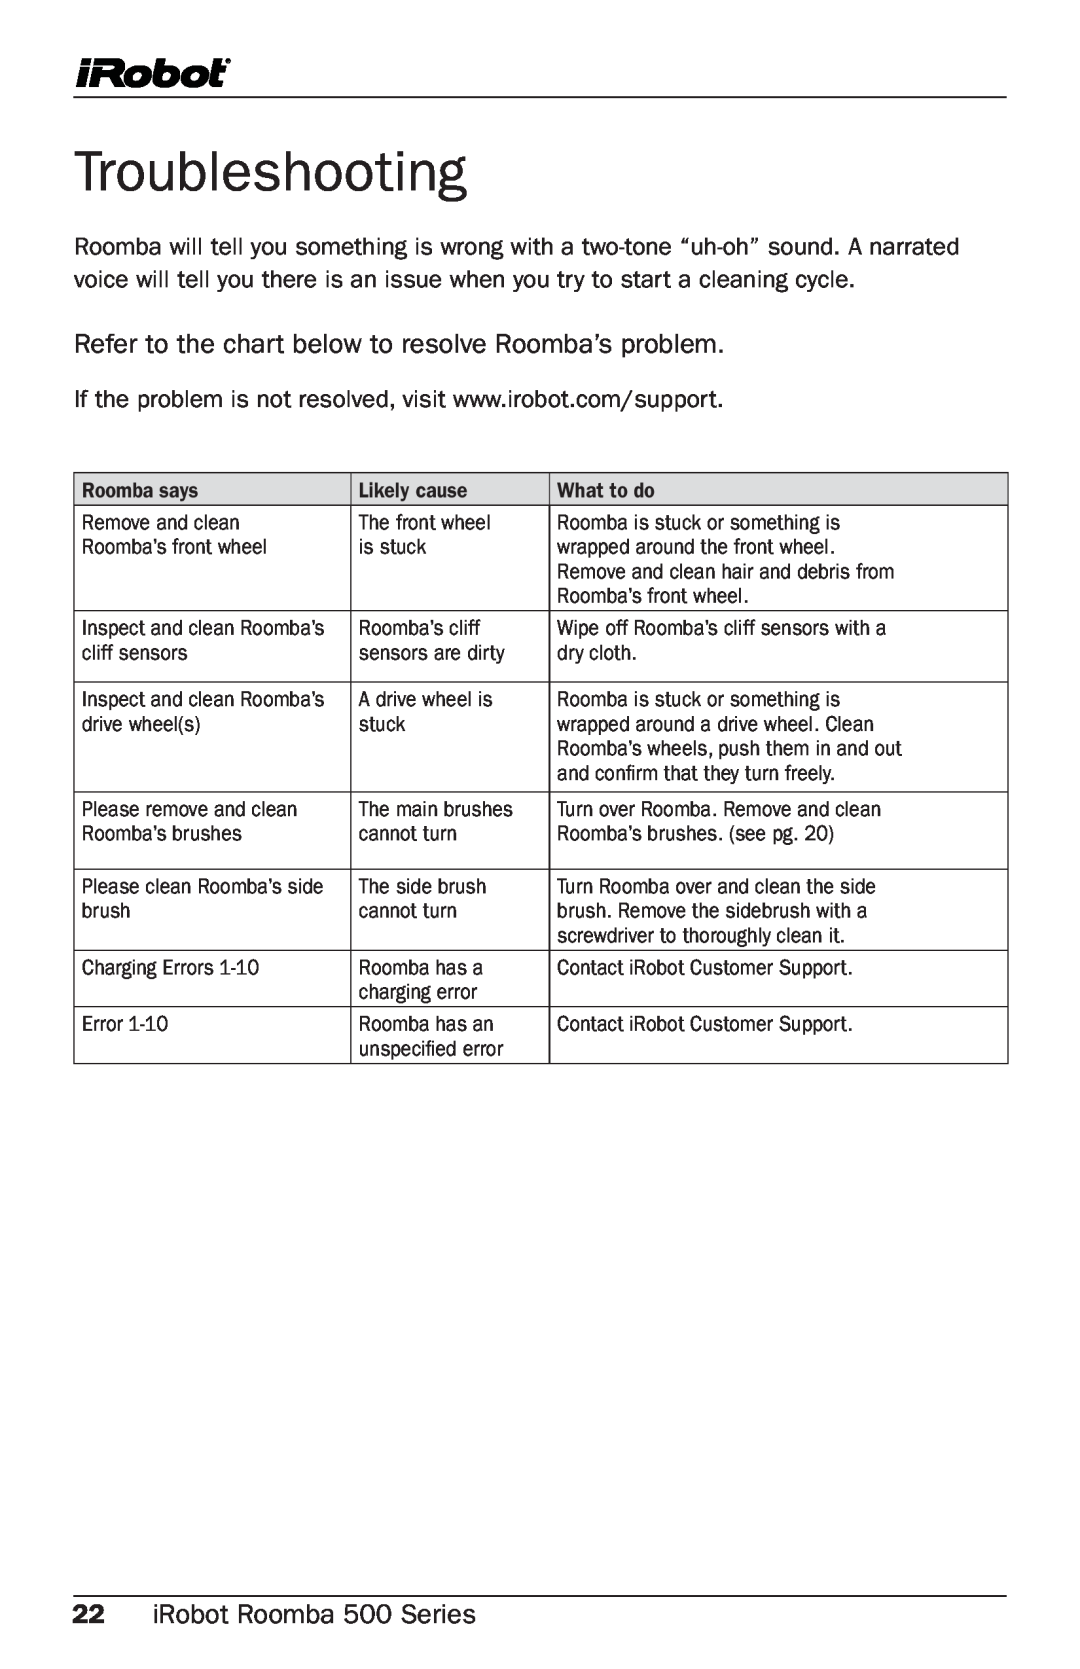 iRobot manual Troubleshooting, Refer to the chart below to resolve Roomba’s problem, iRobot Roomba 500 Series 